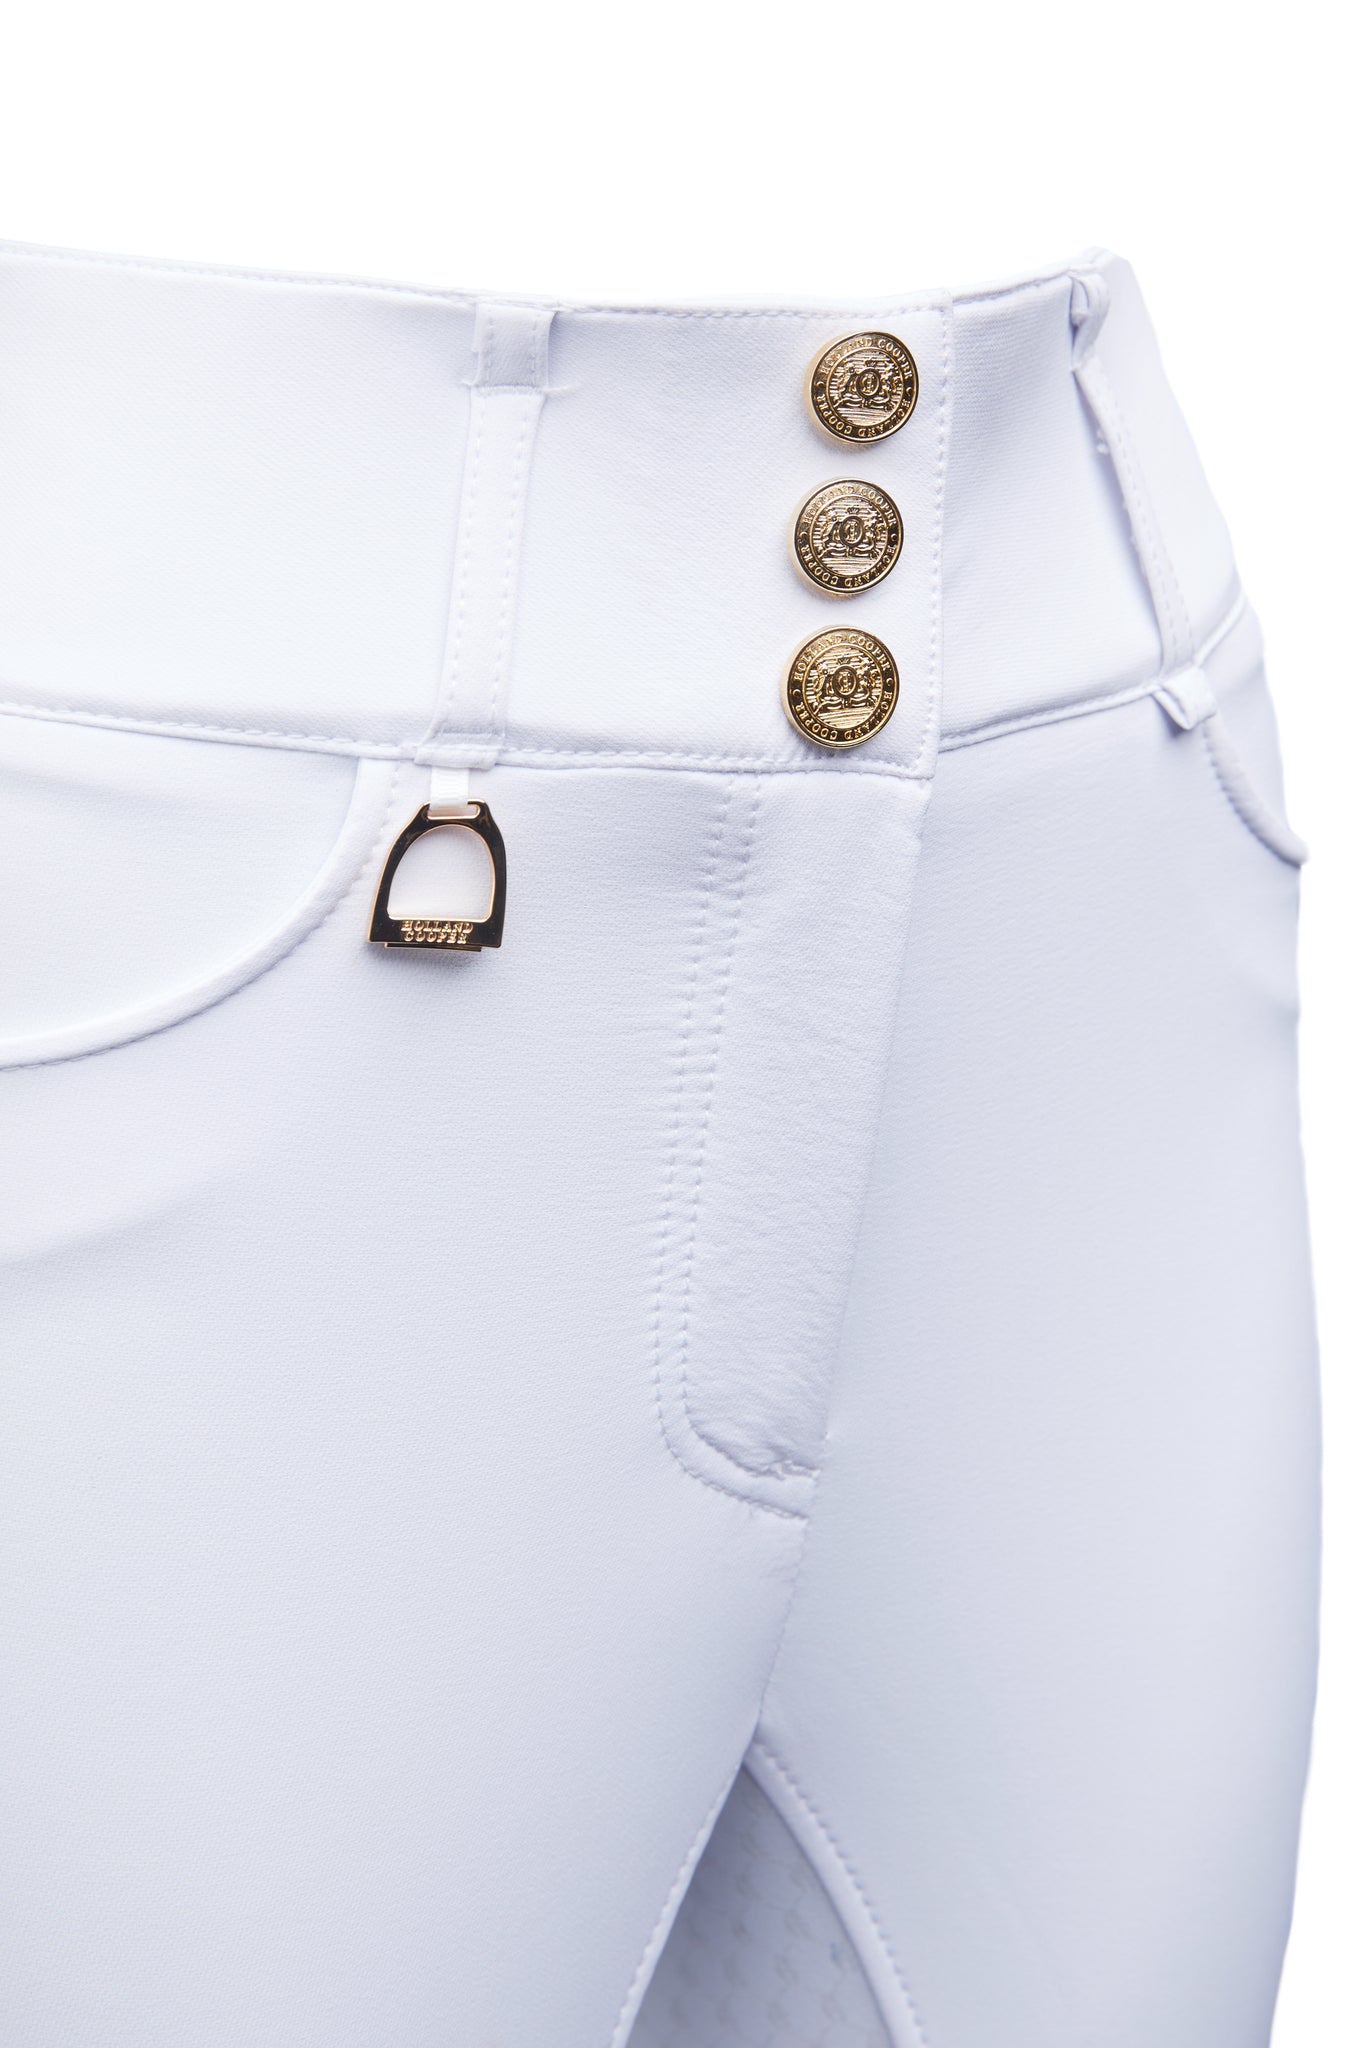 Full Seat Competition Breeches (Optic White)